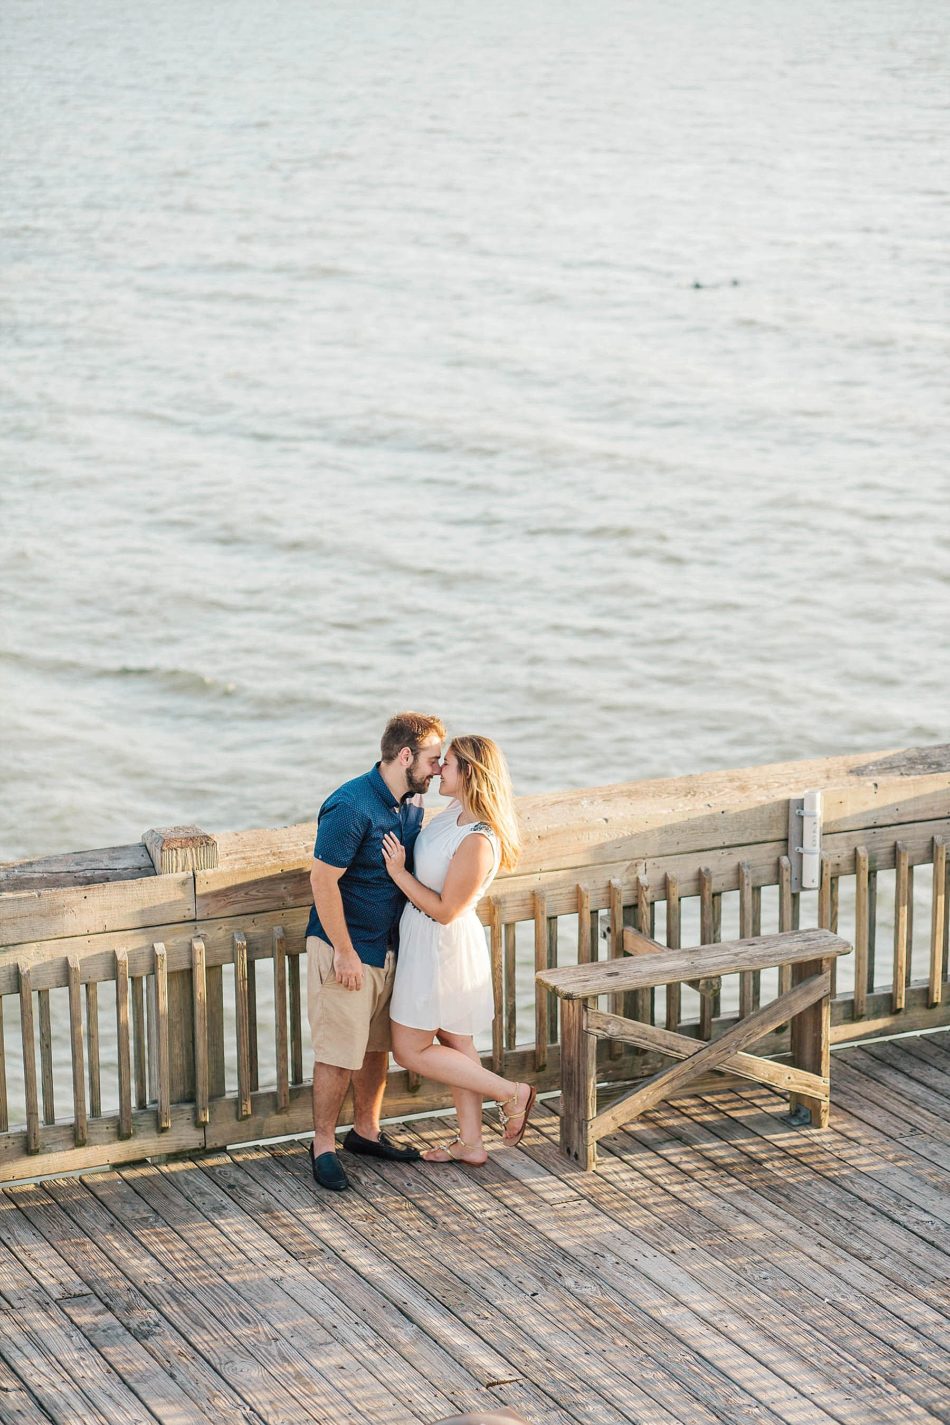 Engaged Couple kiss on pier, Folly beach in Charleston, South Carolina Kate Timbers Photography. http://katetimbers.com #katetimbersphotography // Charleston Photography // Inspiration